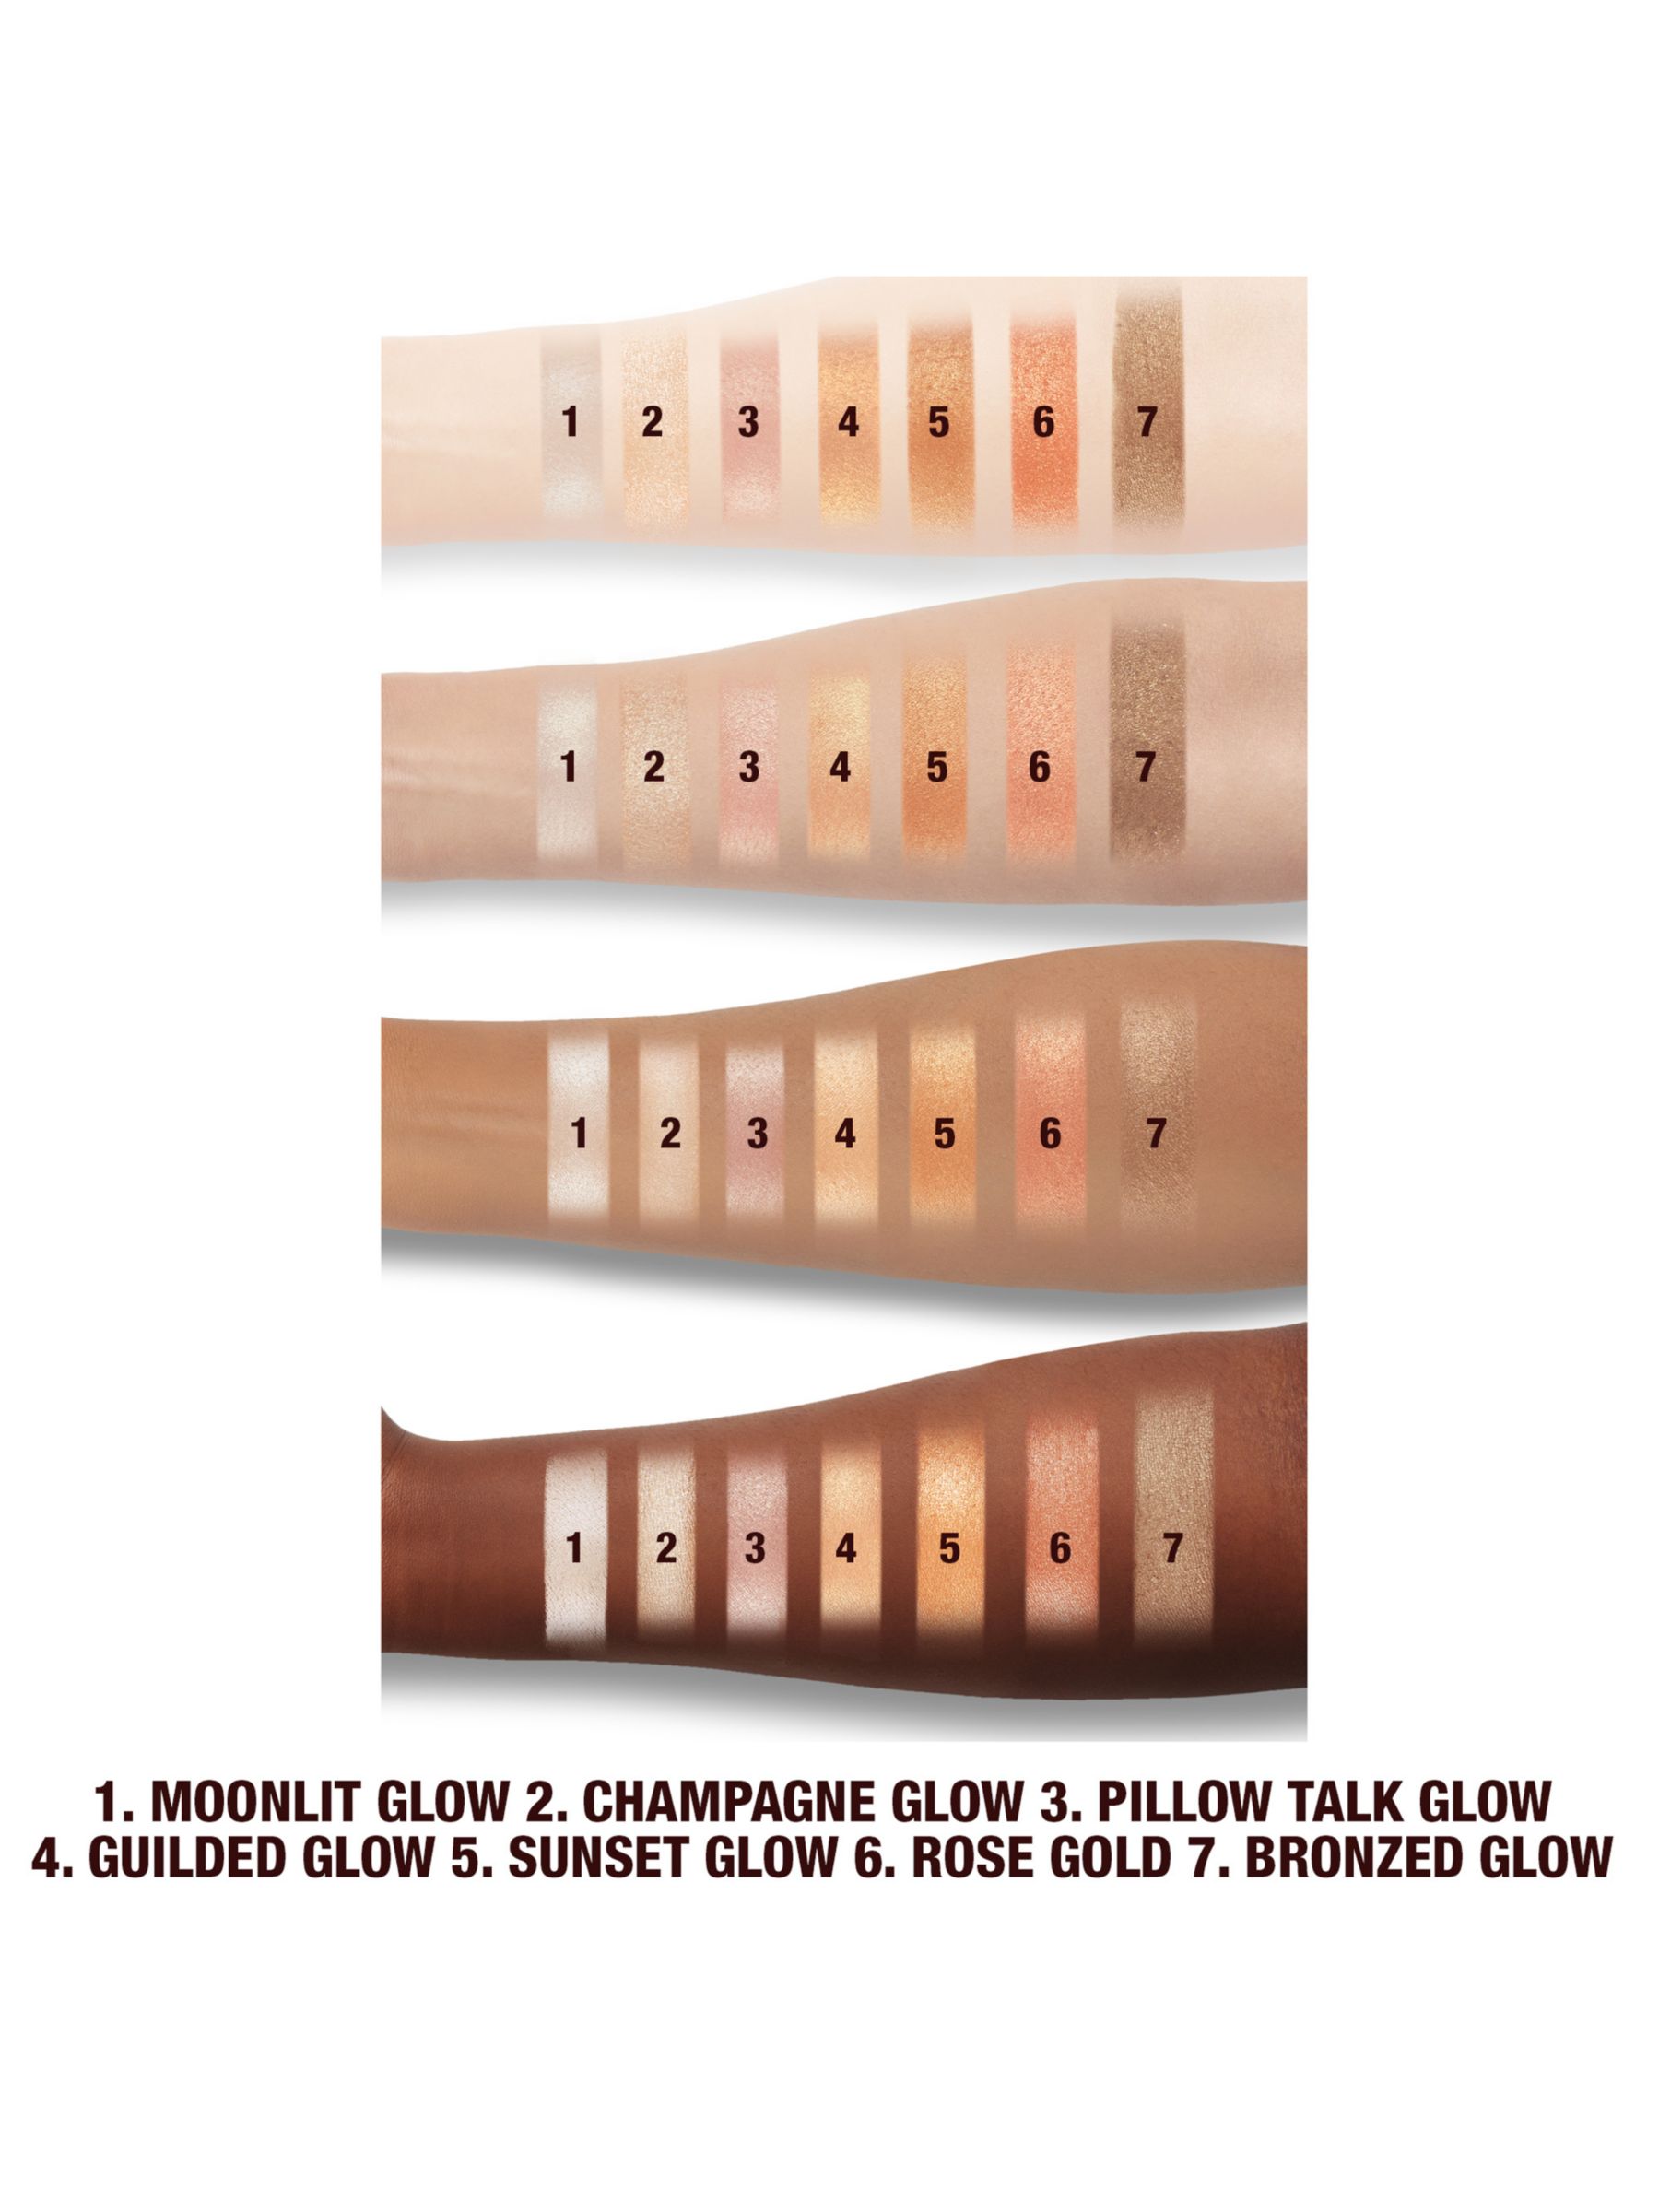 Charlotte Tilbury Hollywood Glow Glide Face Architect Highlighter, Gilded Glow 4